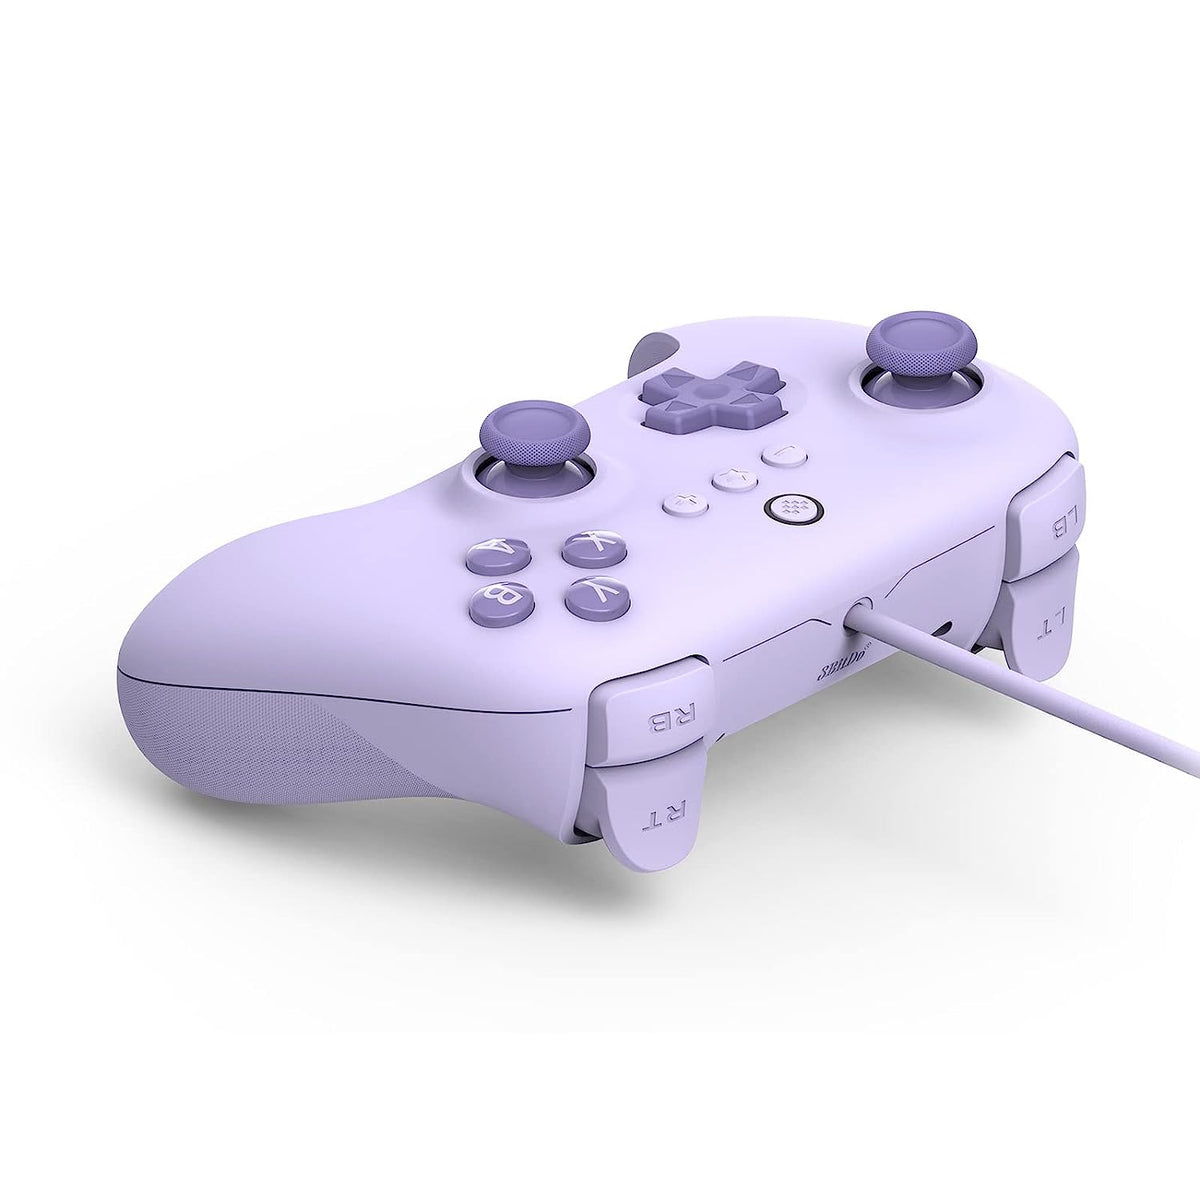 8BitDo Ultimate C wired Controller voor PC, Android, Steam deck en Pi Gamesellers.nl